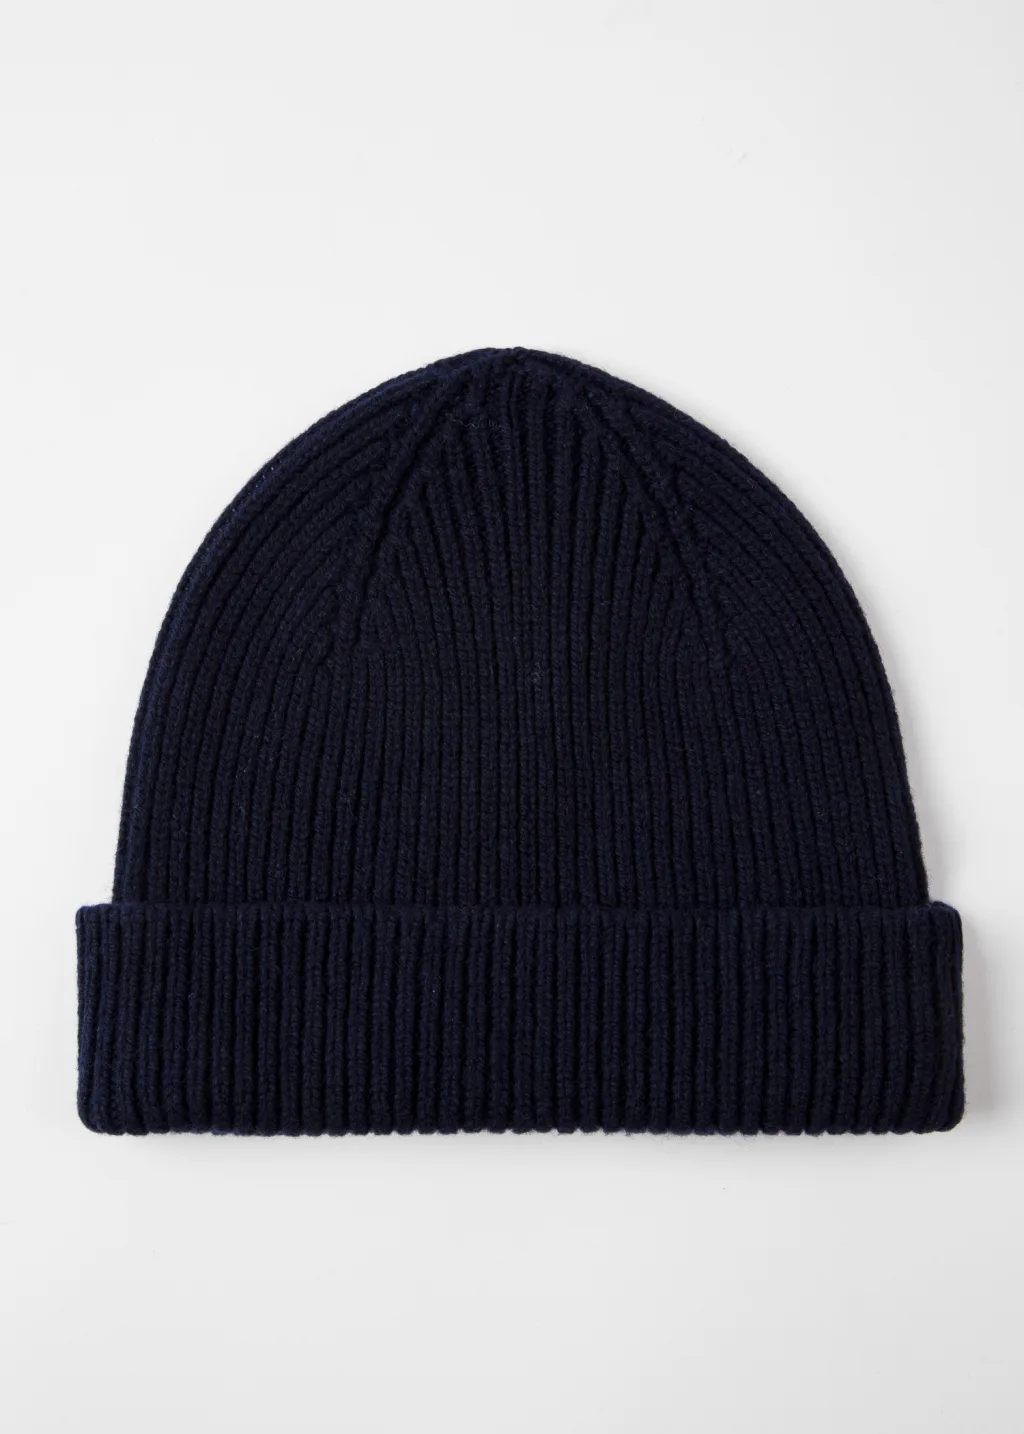 Men's Navy Cashmere-Blend Ribbed Beanie Hat